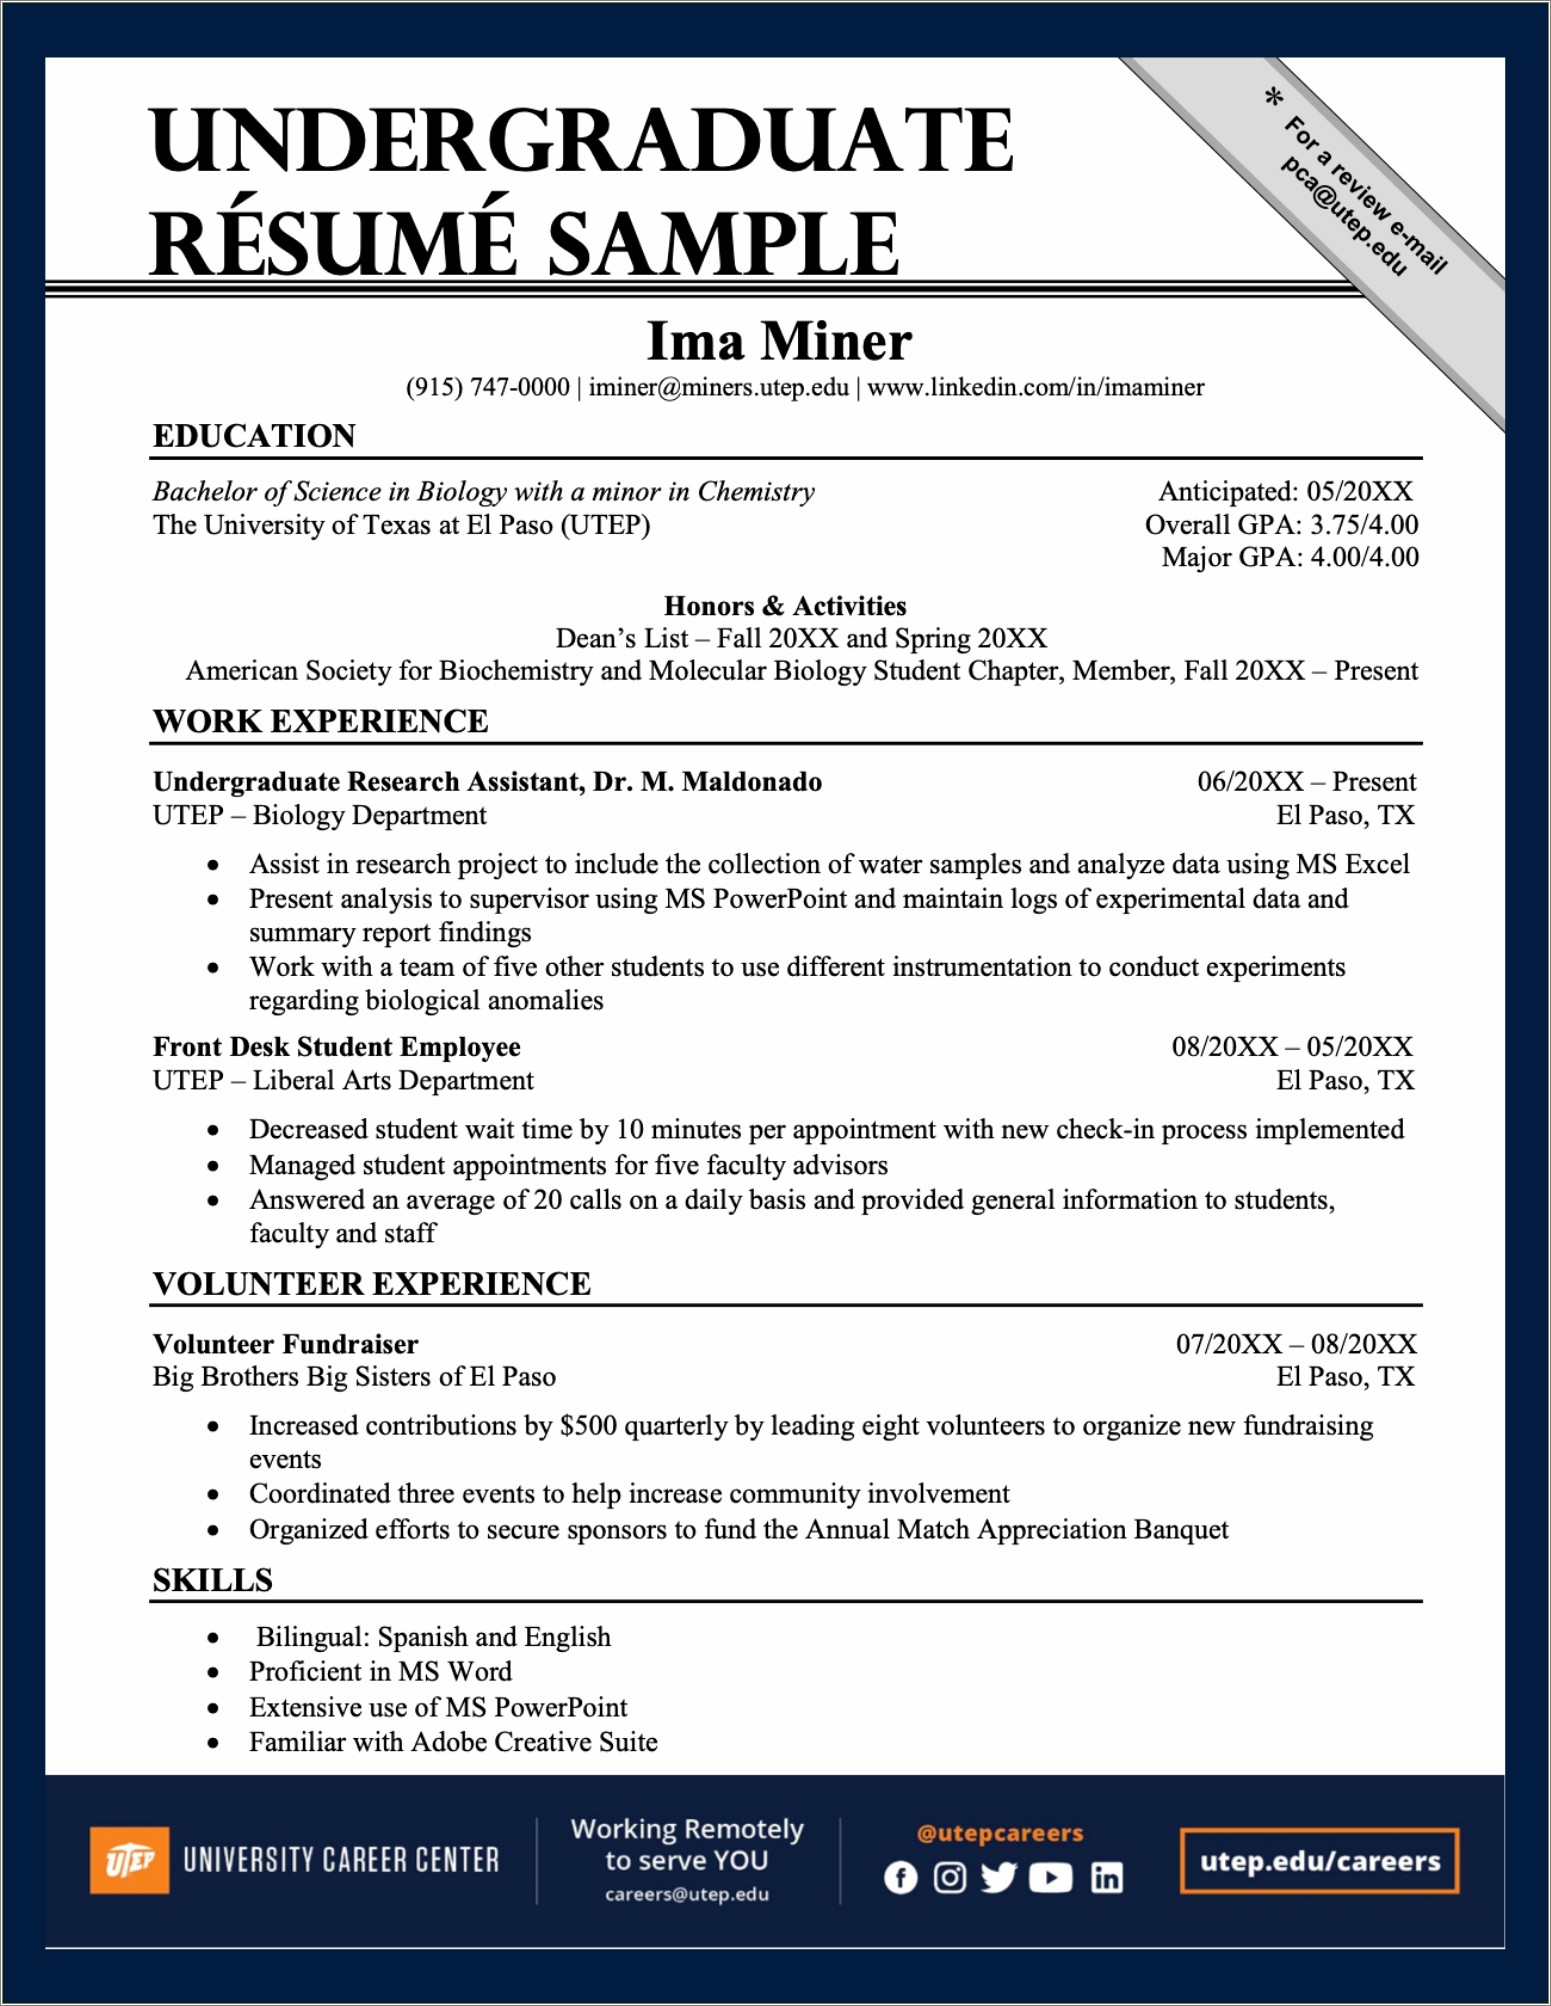 Send Resume As Word Document Or Pdf